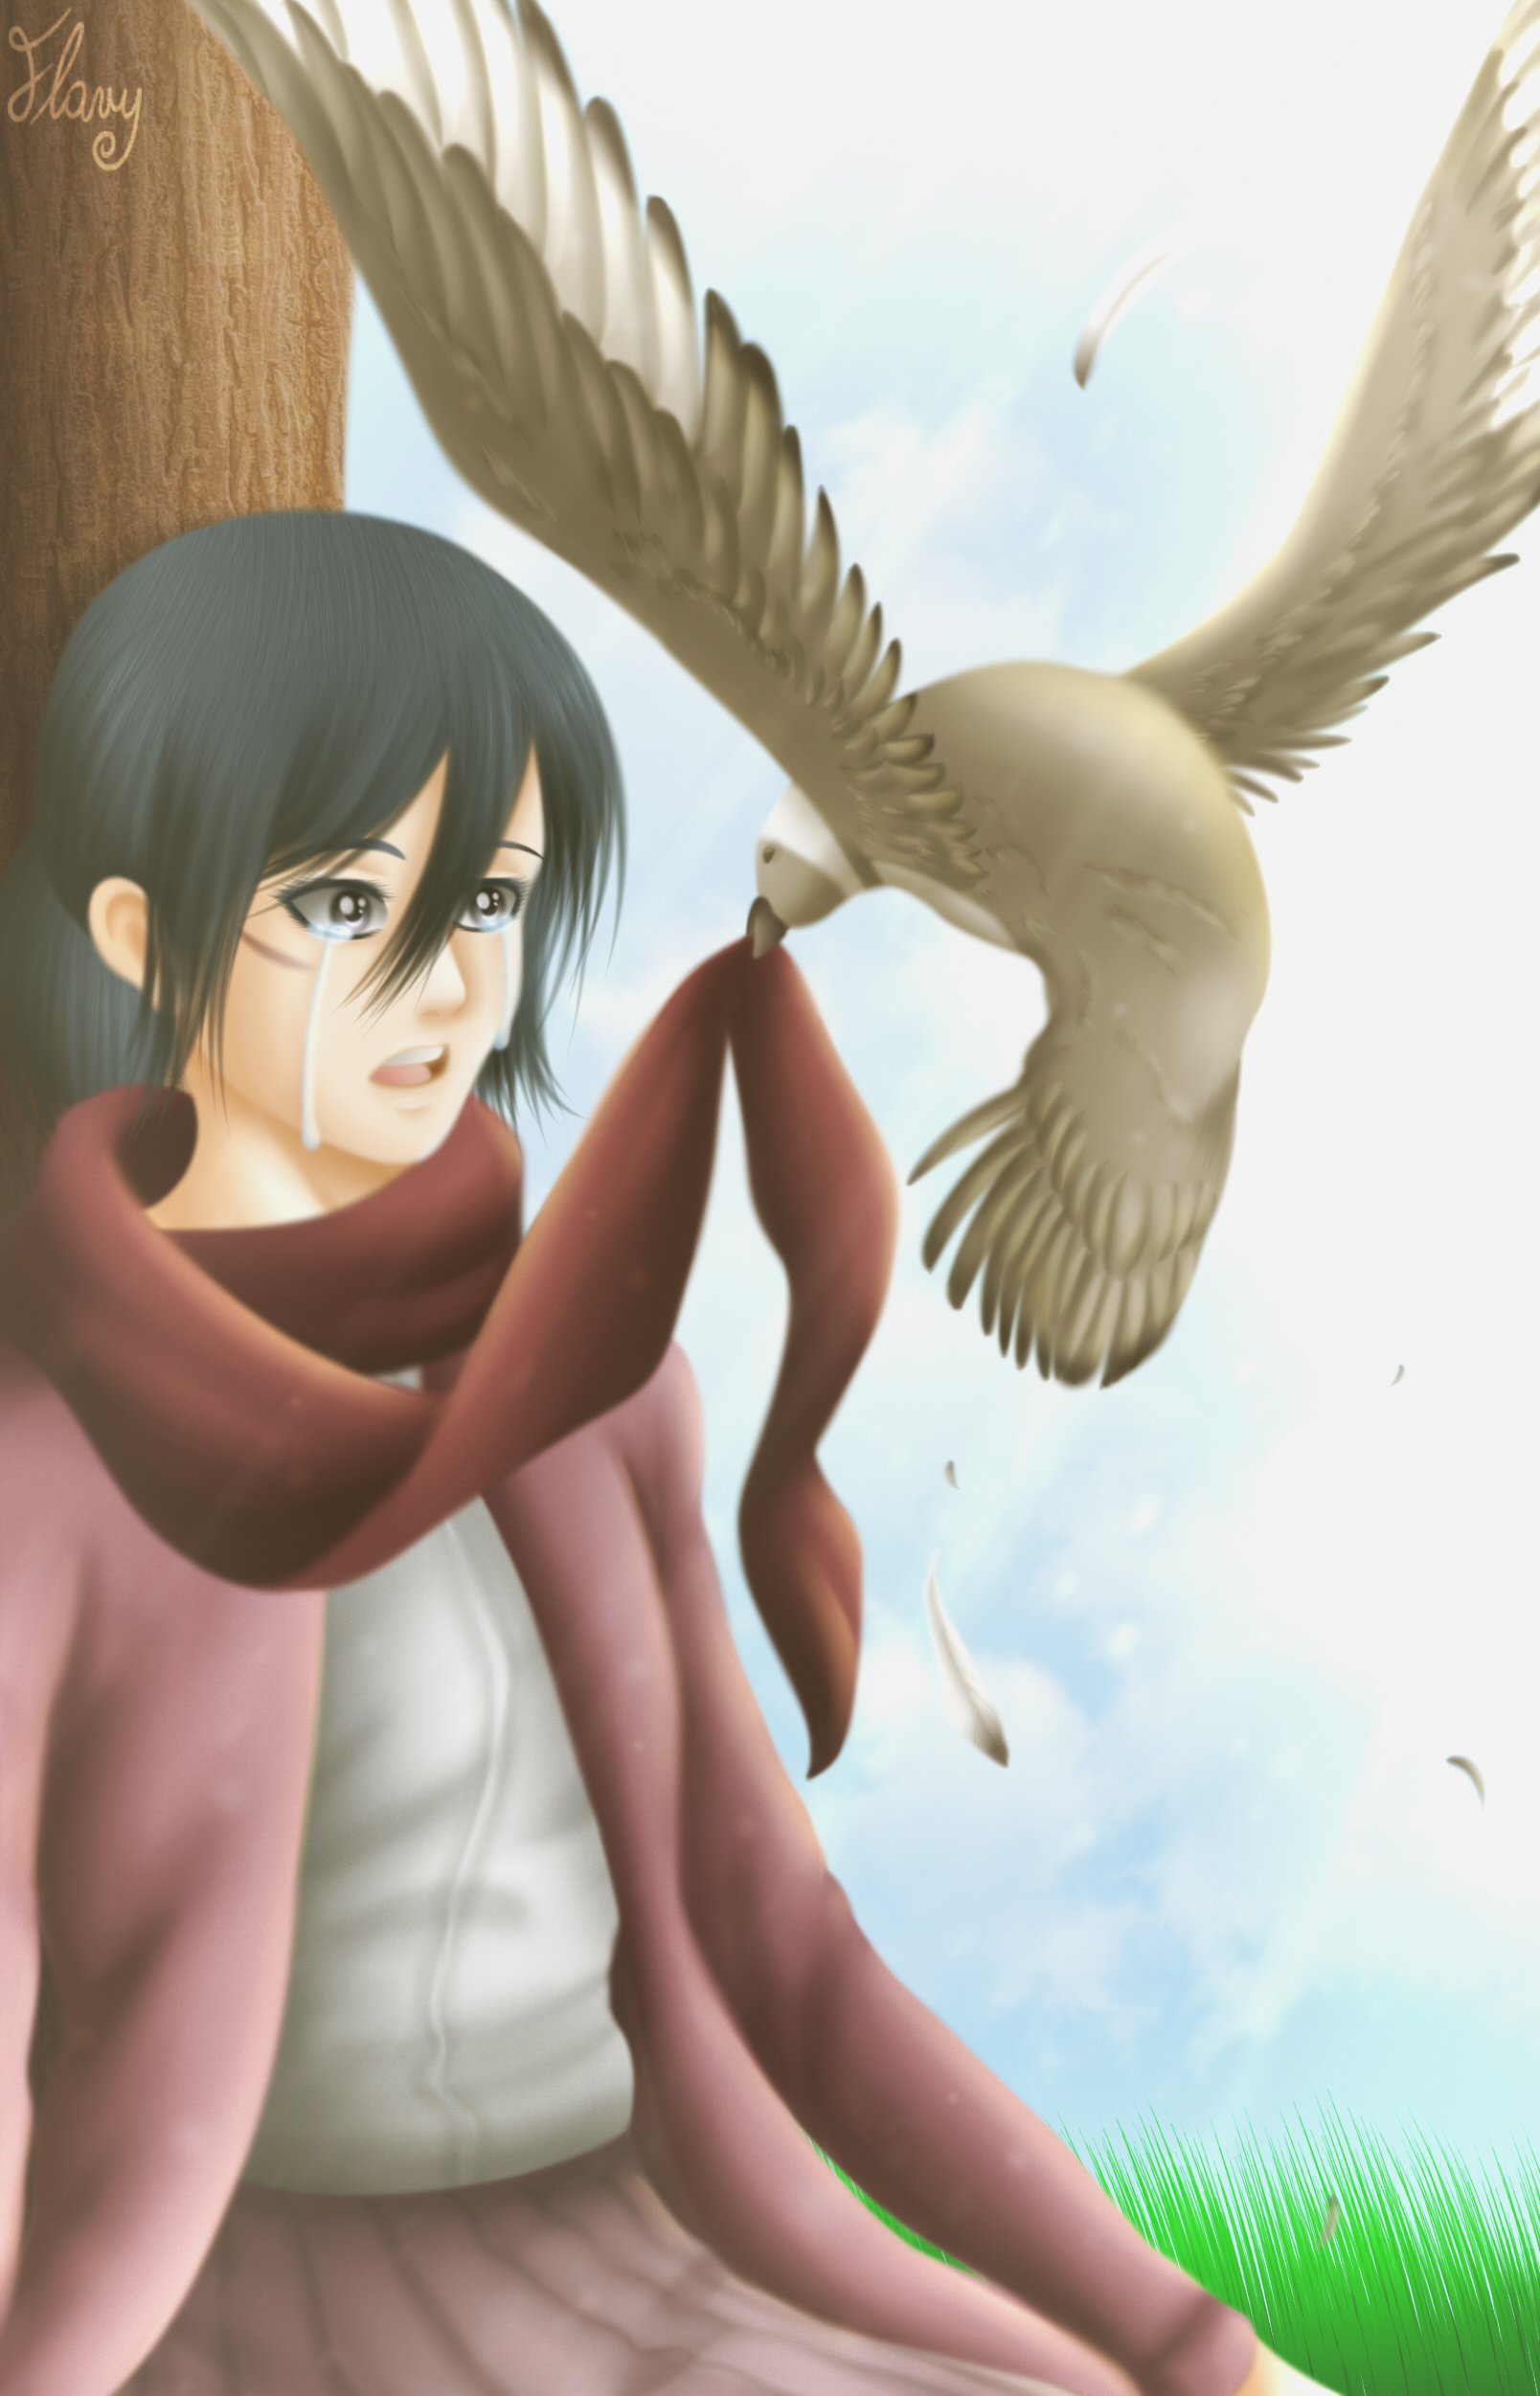 Mikasa Grasps Her Scarf Solemnly in New Attack on Titan Final